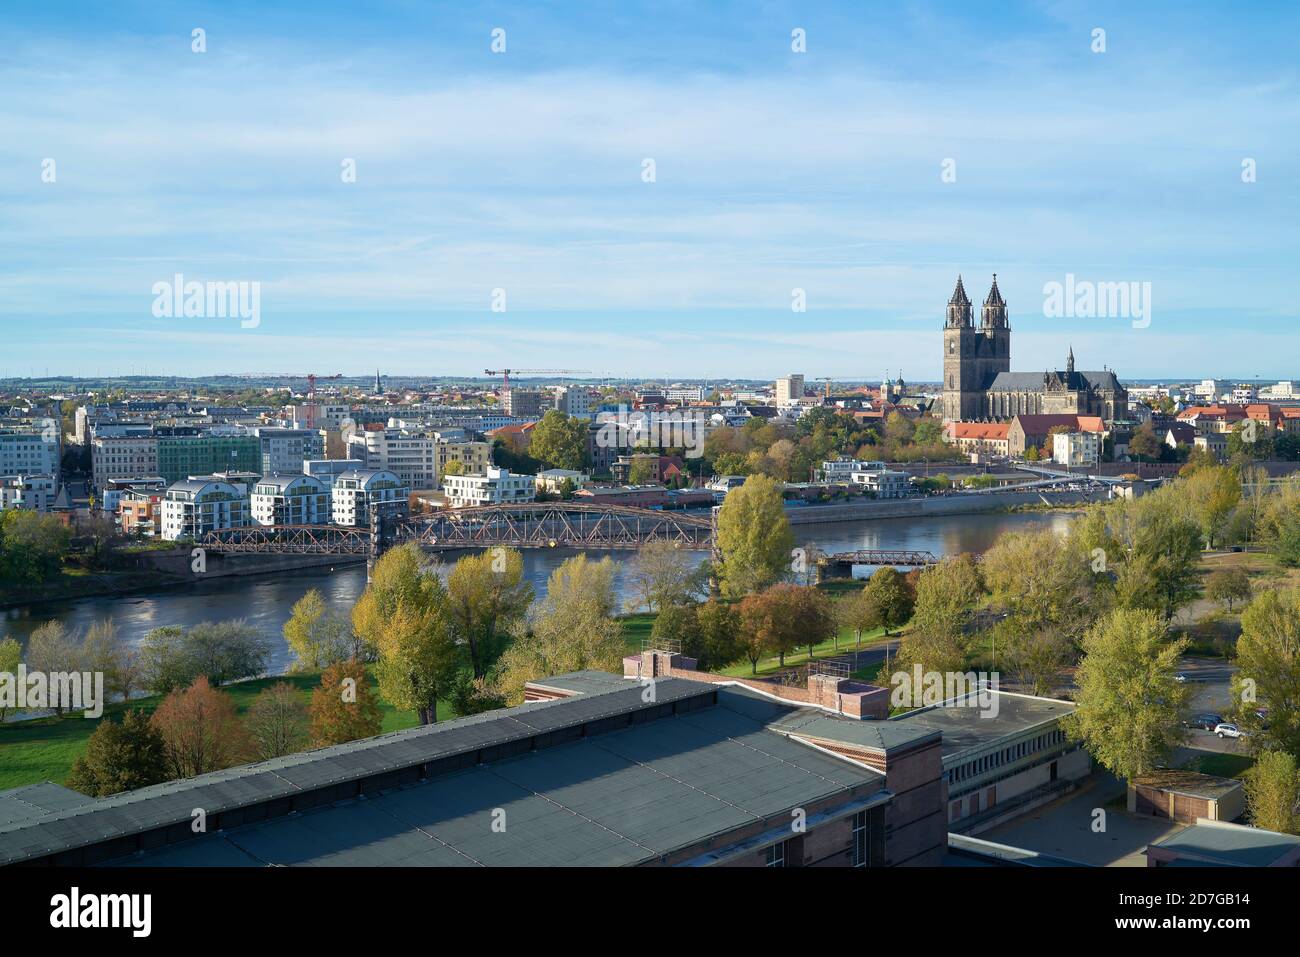 View of the city of Magdeburg on the Elbe cycle path with the river Elbe and Magdeburg Cathedral Stock Photo